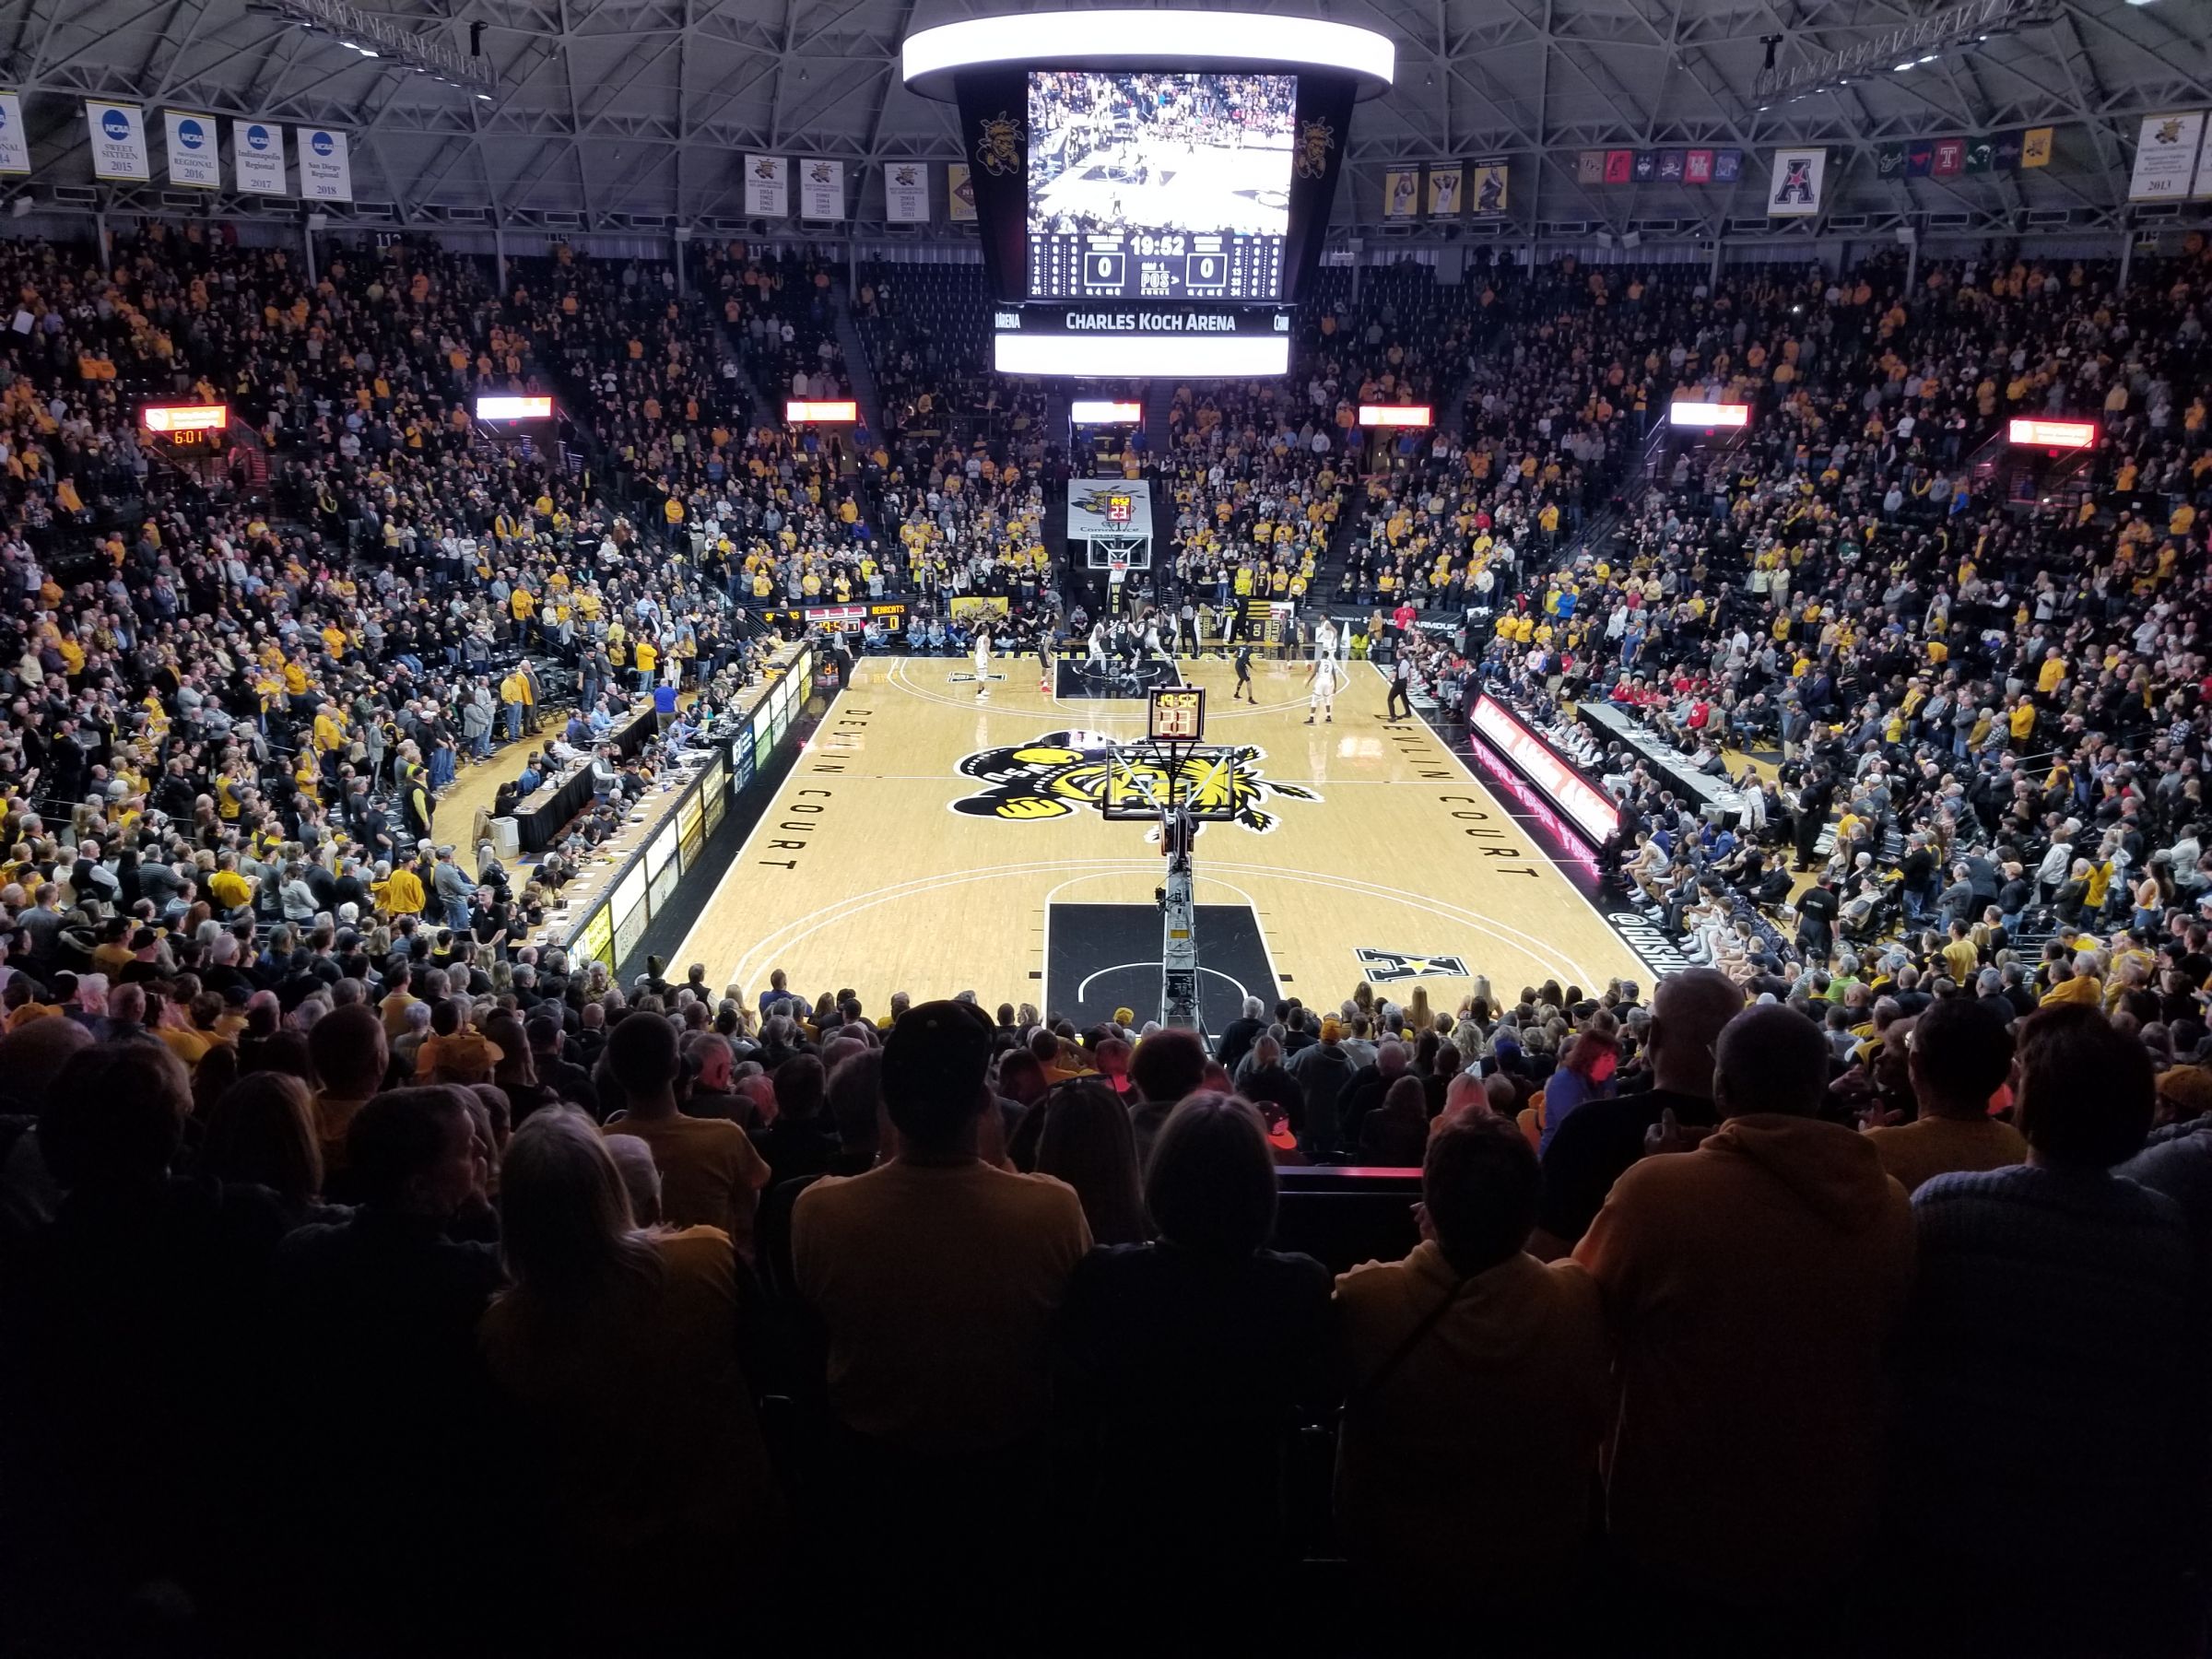 section 126, row 27 seat view  - charles koch arena